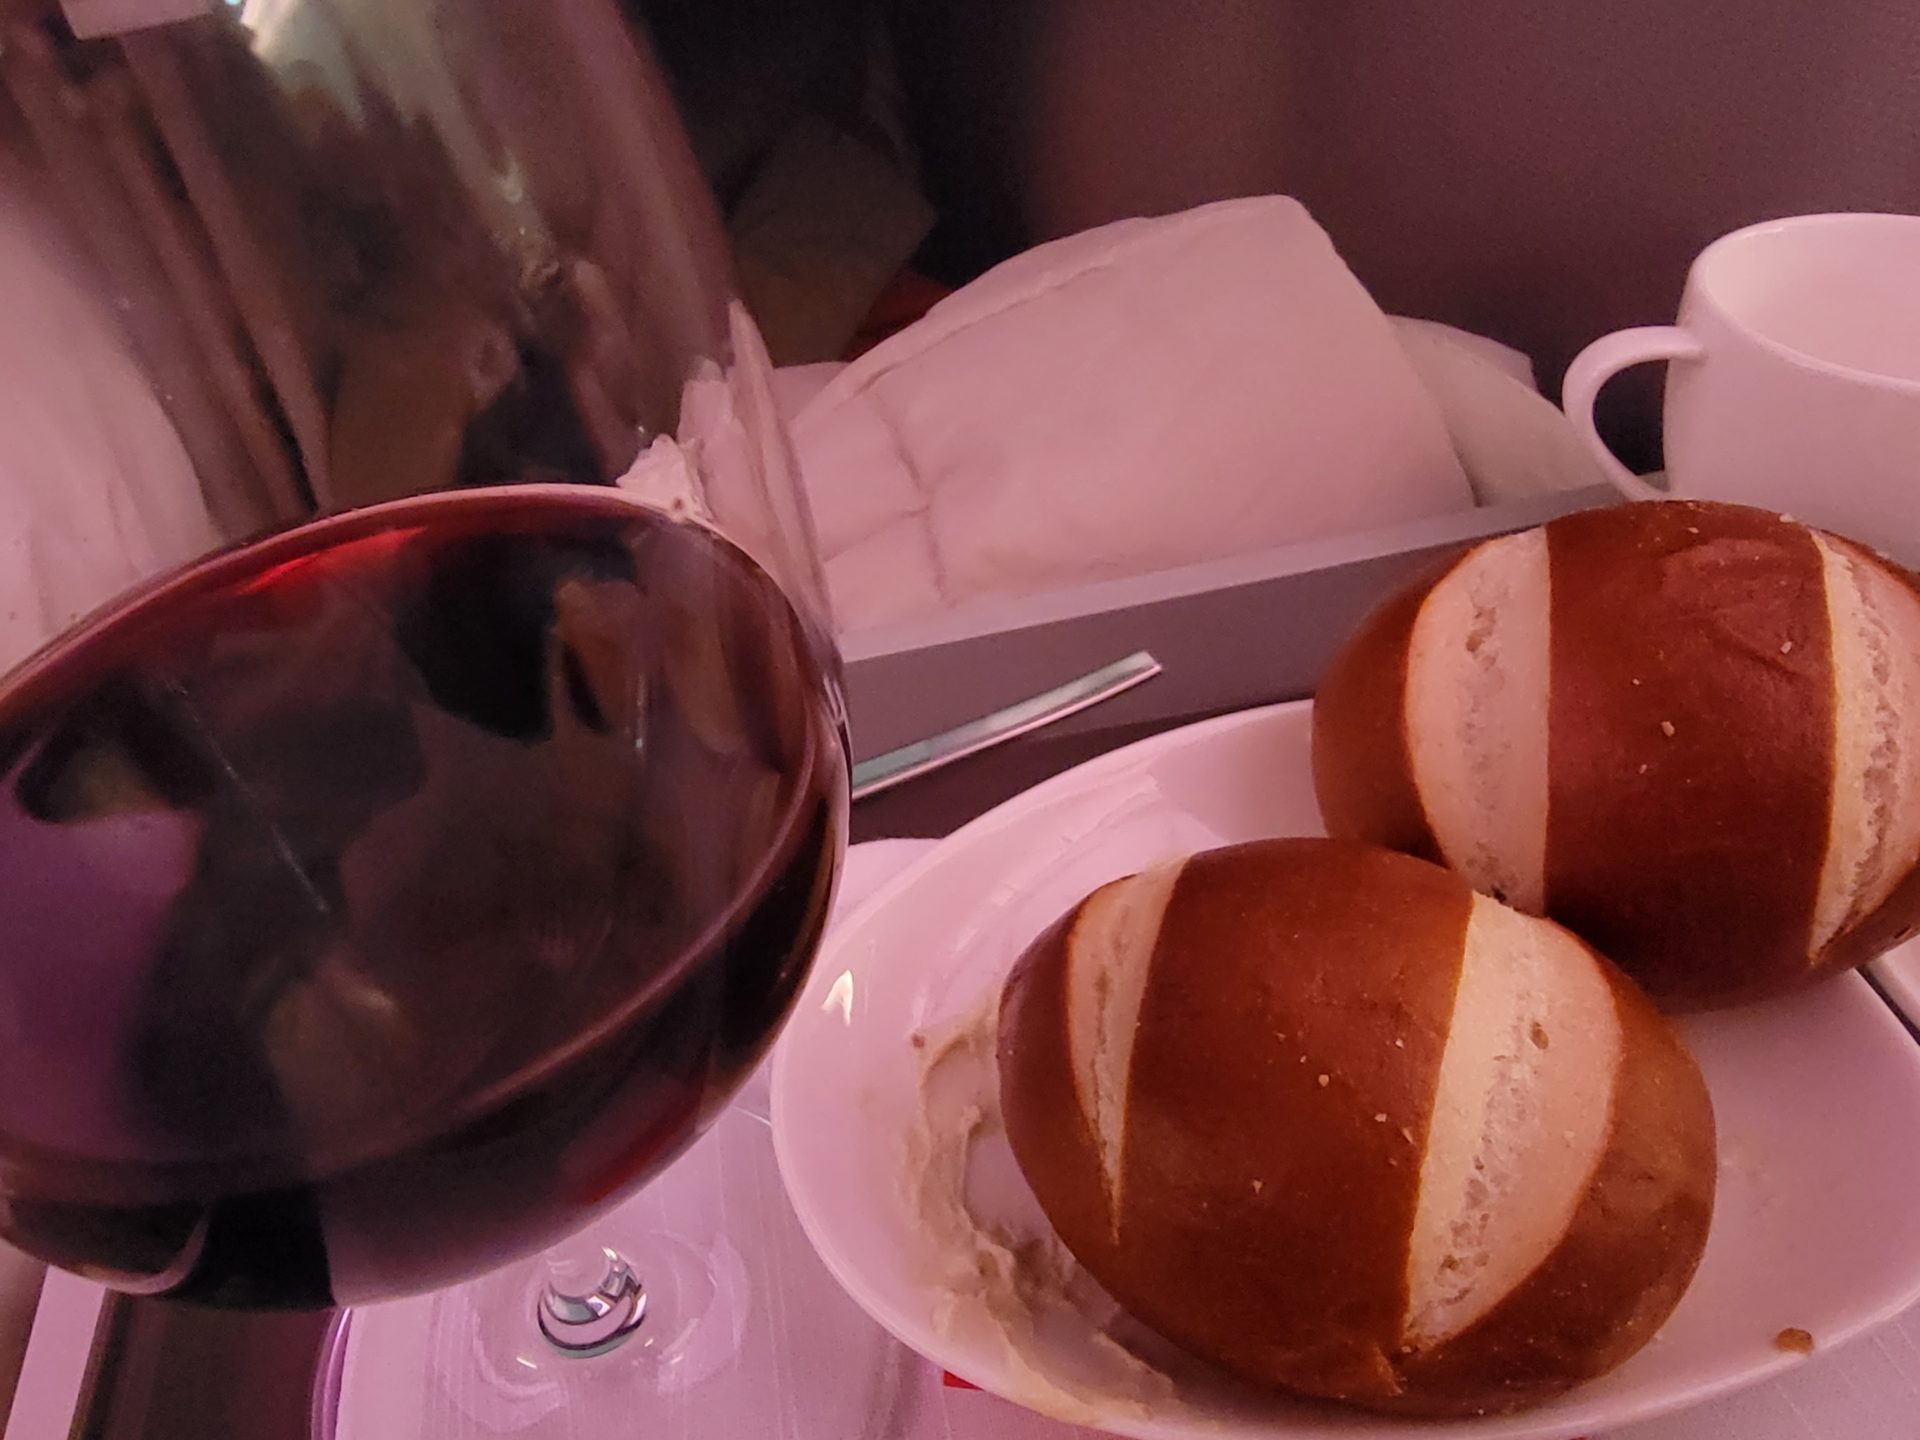 a plate of bread and a glass of wine